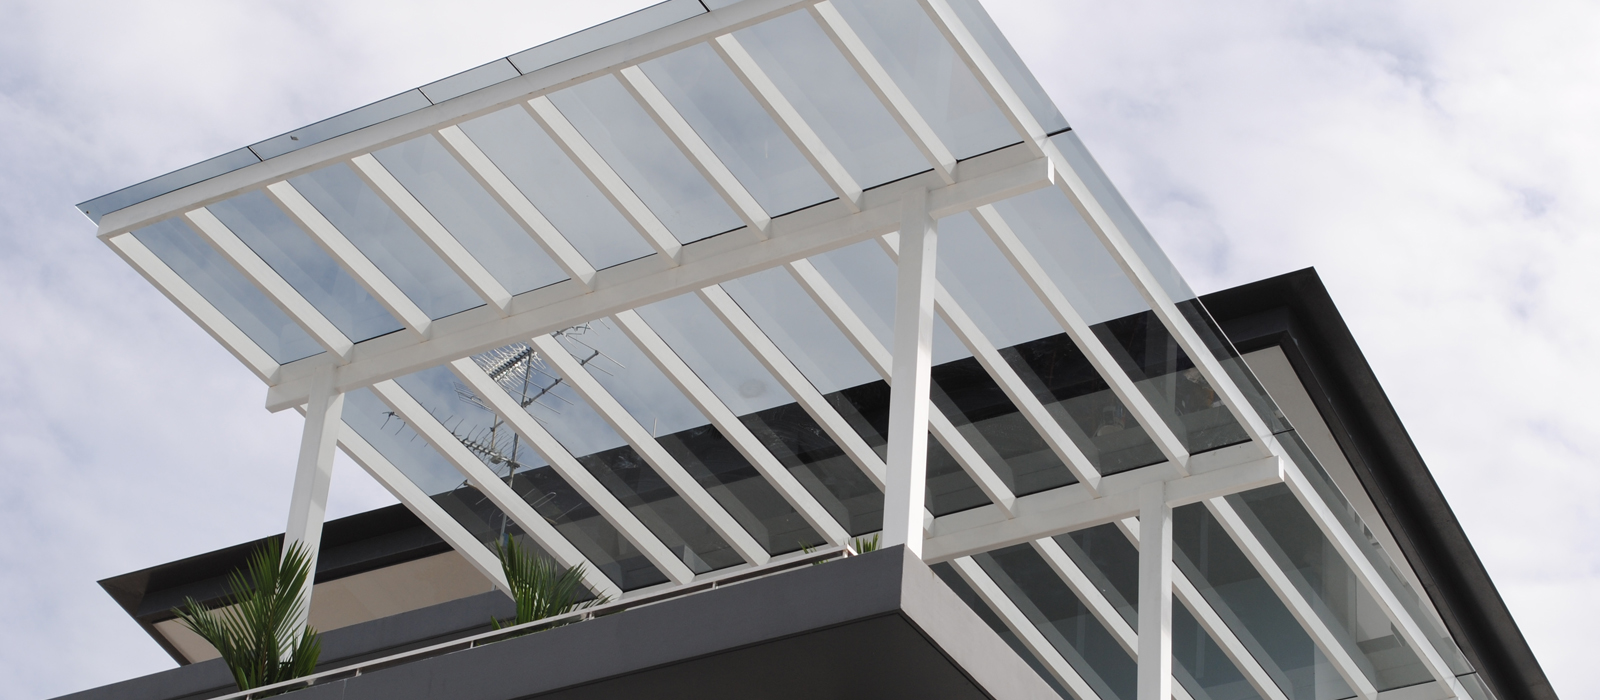 Roofing Tiles Malaysia Polycarbonate Awning Glass Skylight